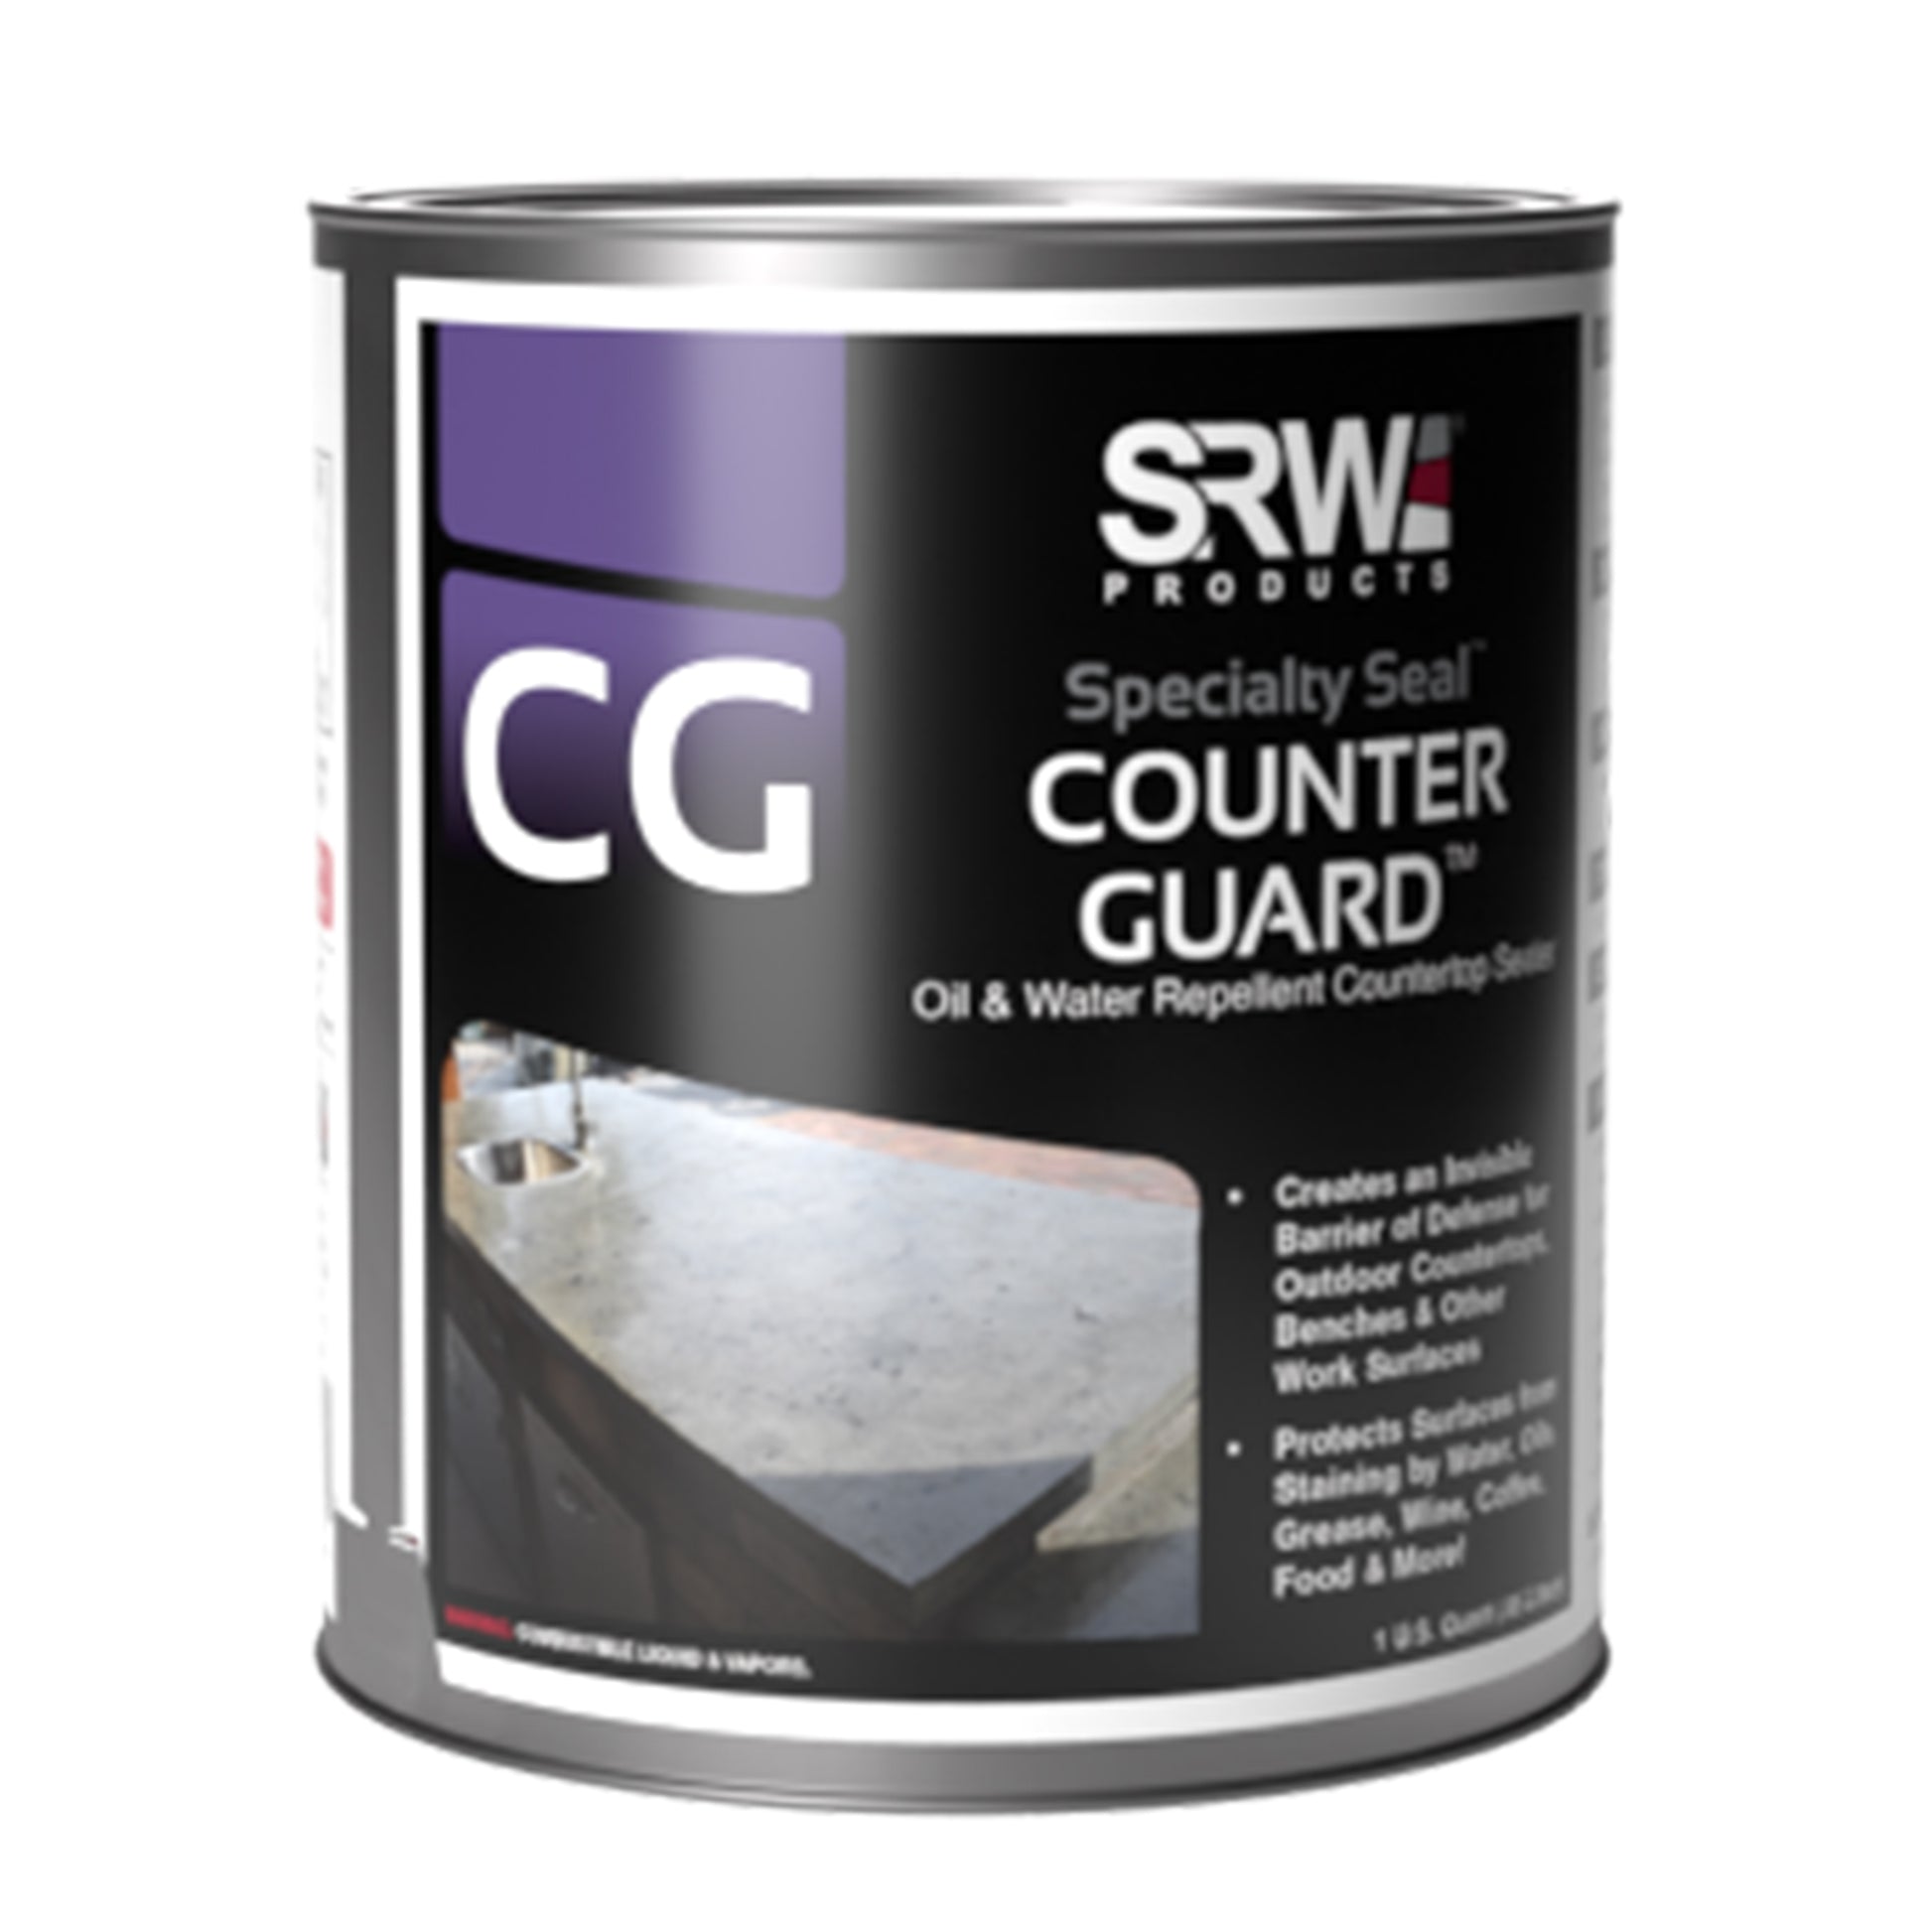 SRW Products CG Counter Guard